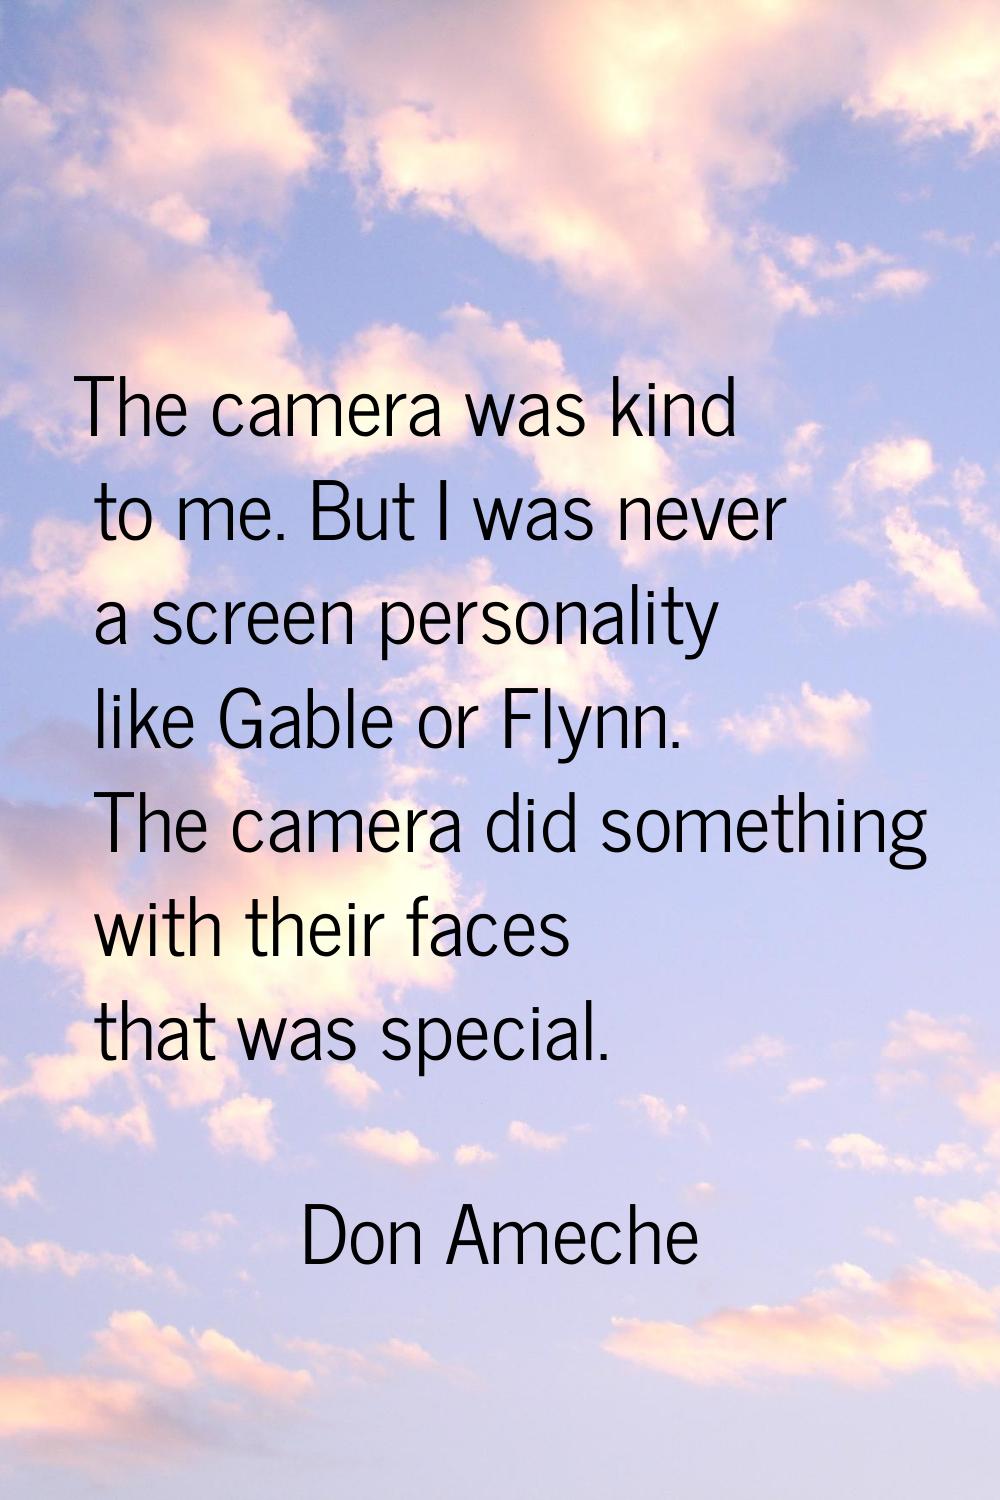 The camera was kind to me. But I was never a screen personality like Gable or Flynn. The camera did